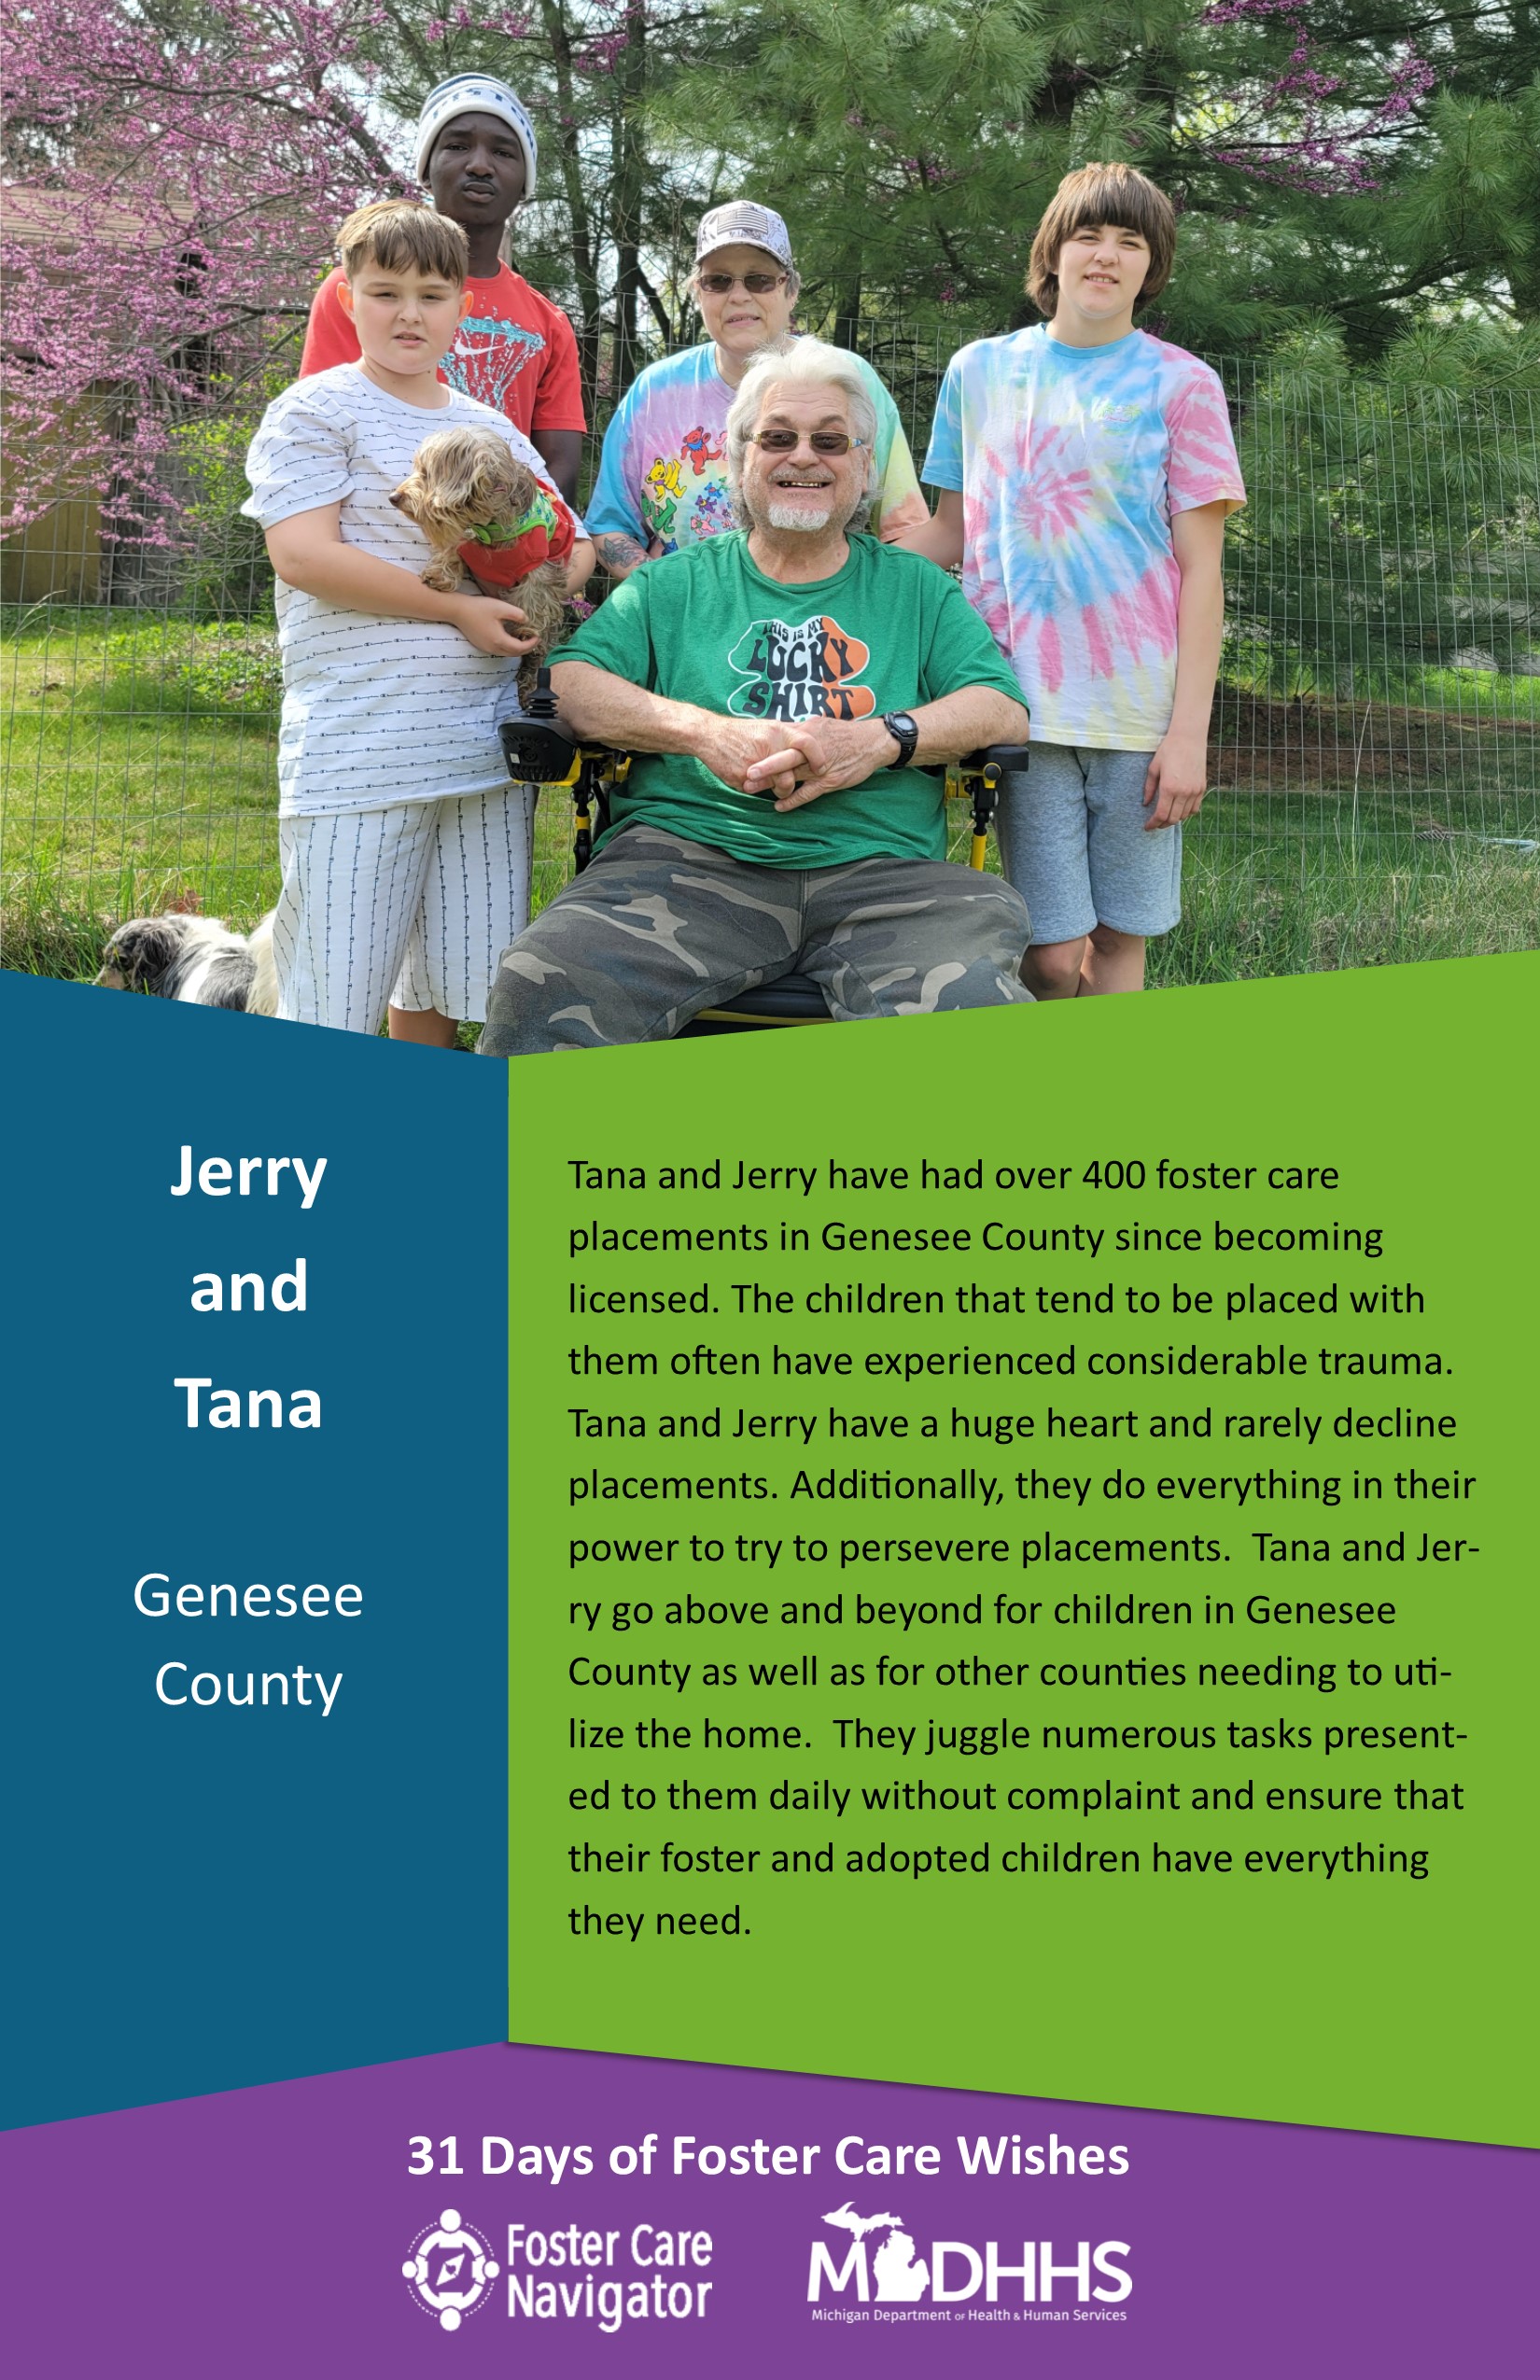 This full page feature includes all of the text listed in the body of this blog post as well as a photo of Jerry and Tana. The background is blue on the left, green on the right, and purple at the bottom of the page where the logos are located.